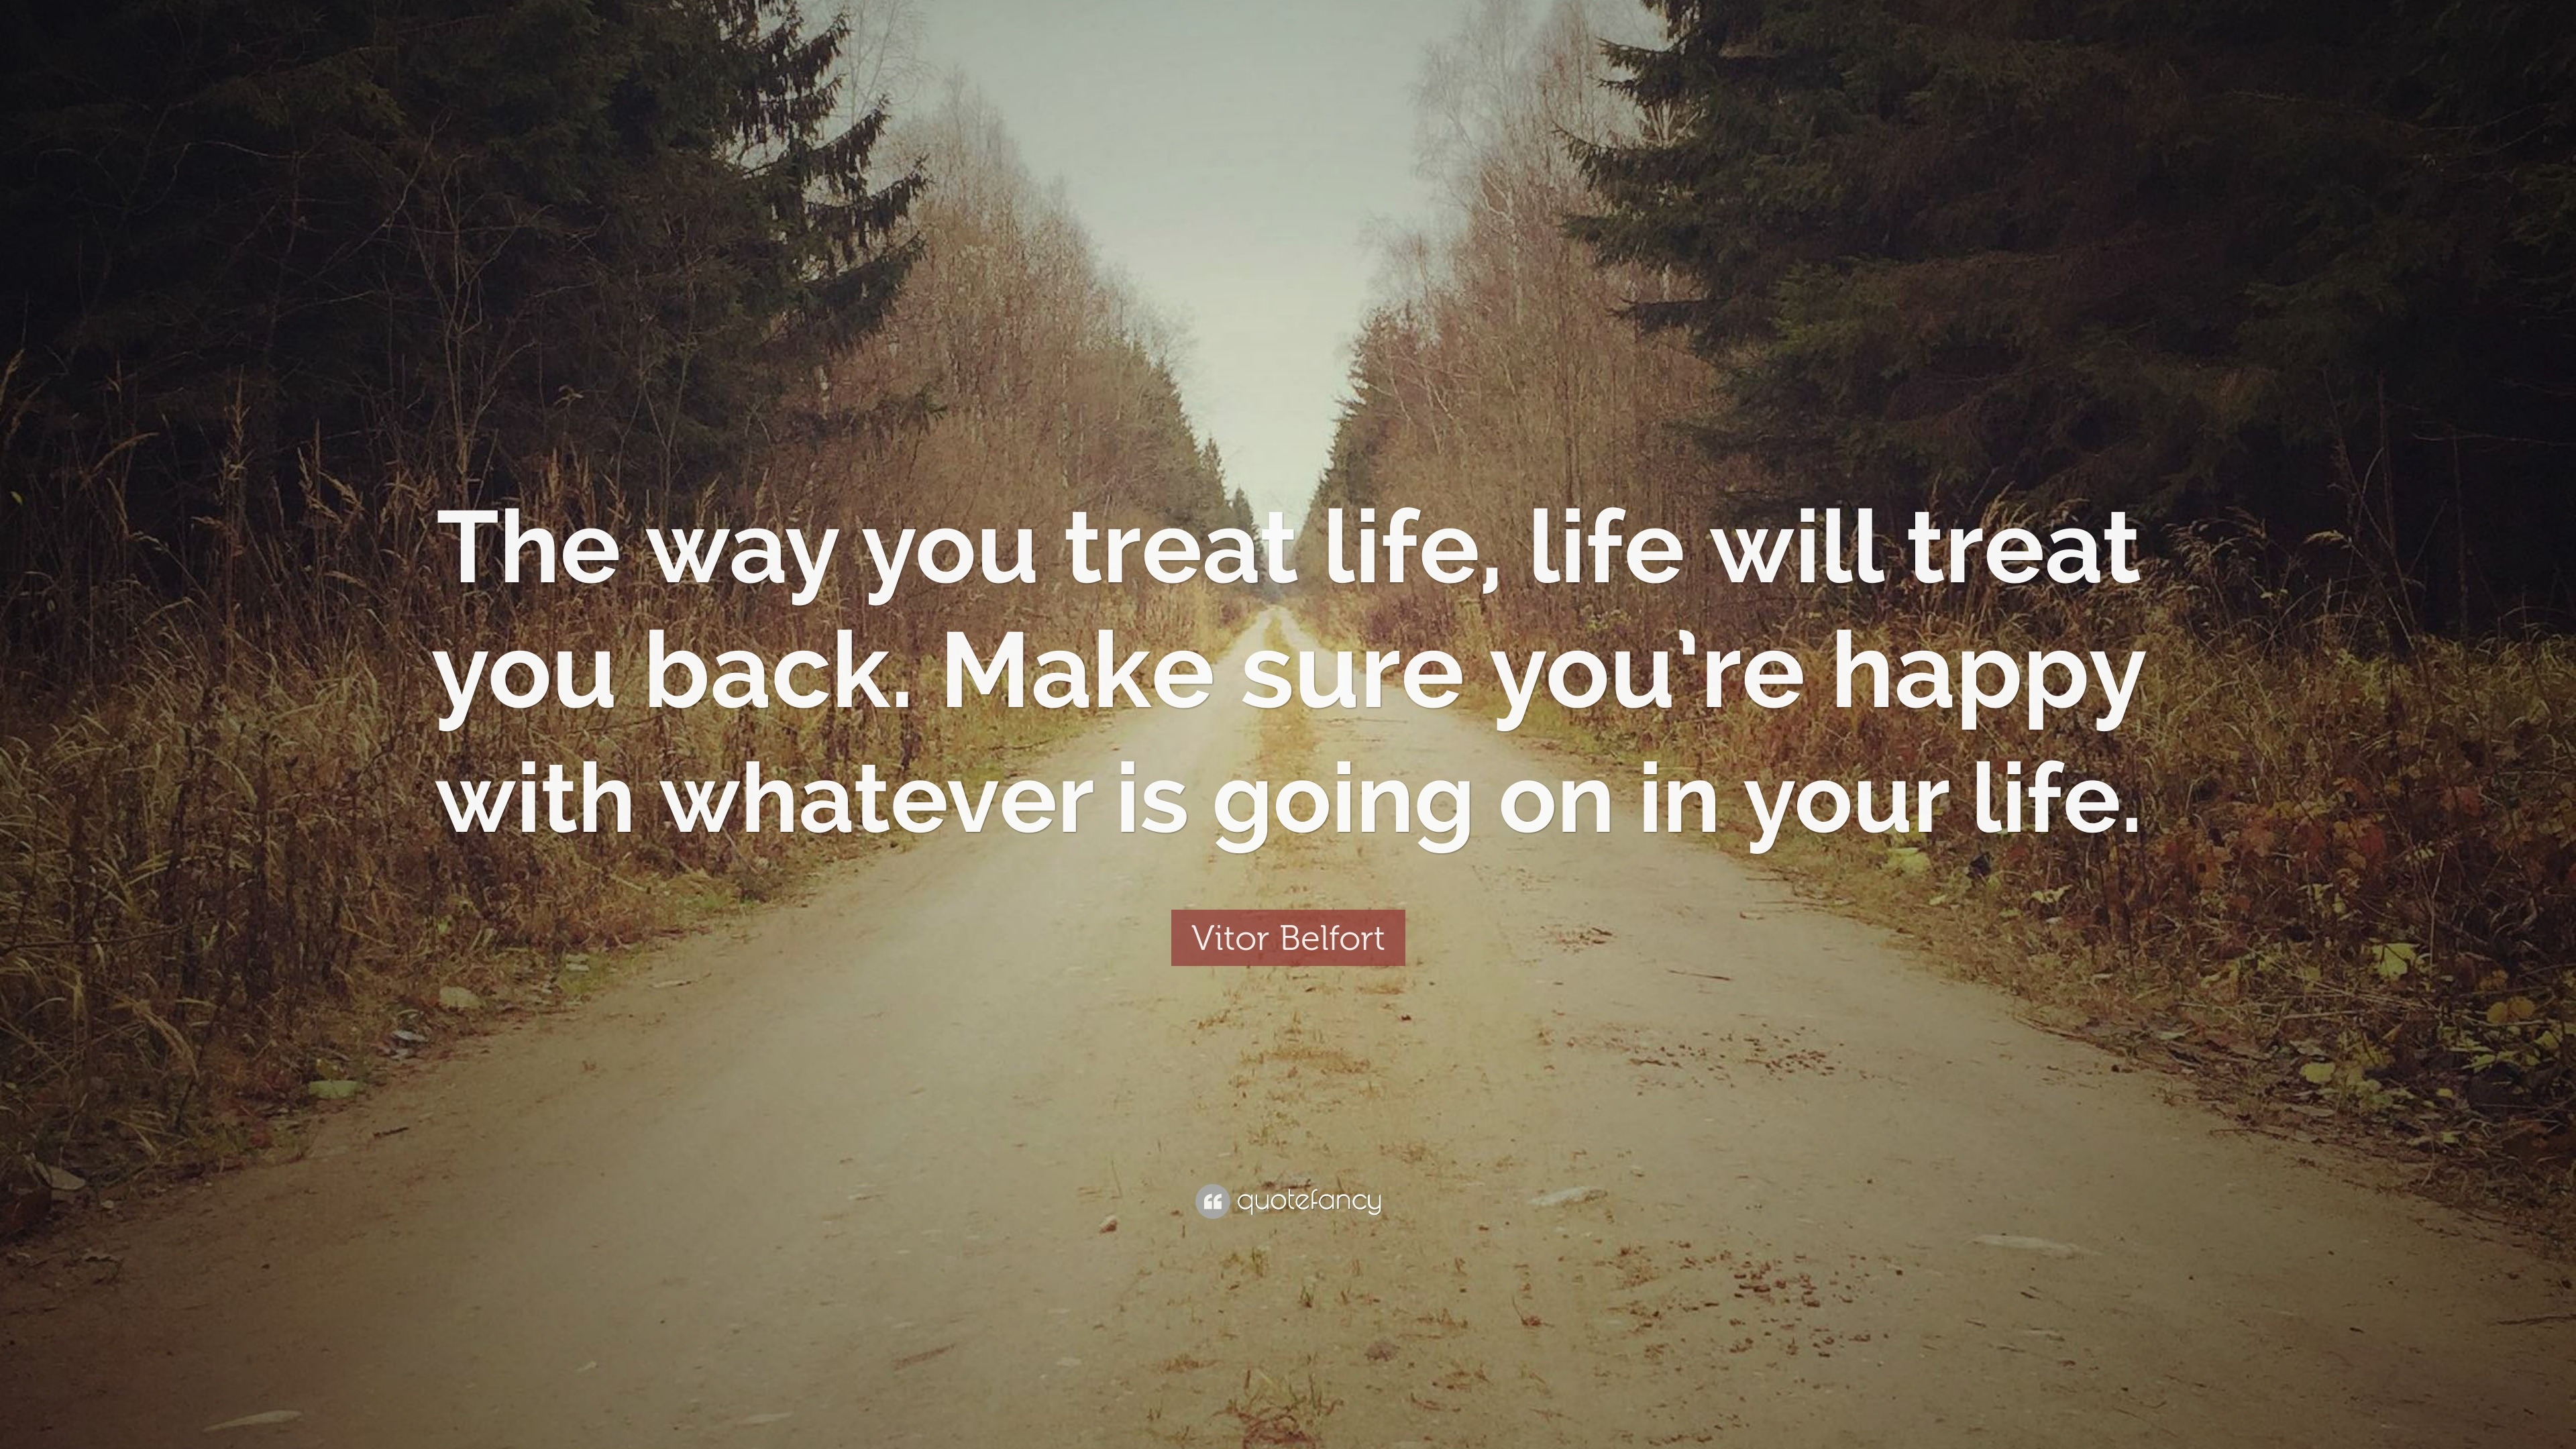 Vitor Belfort Quote: “The way you treat life, life will treat you back ...